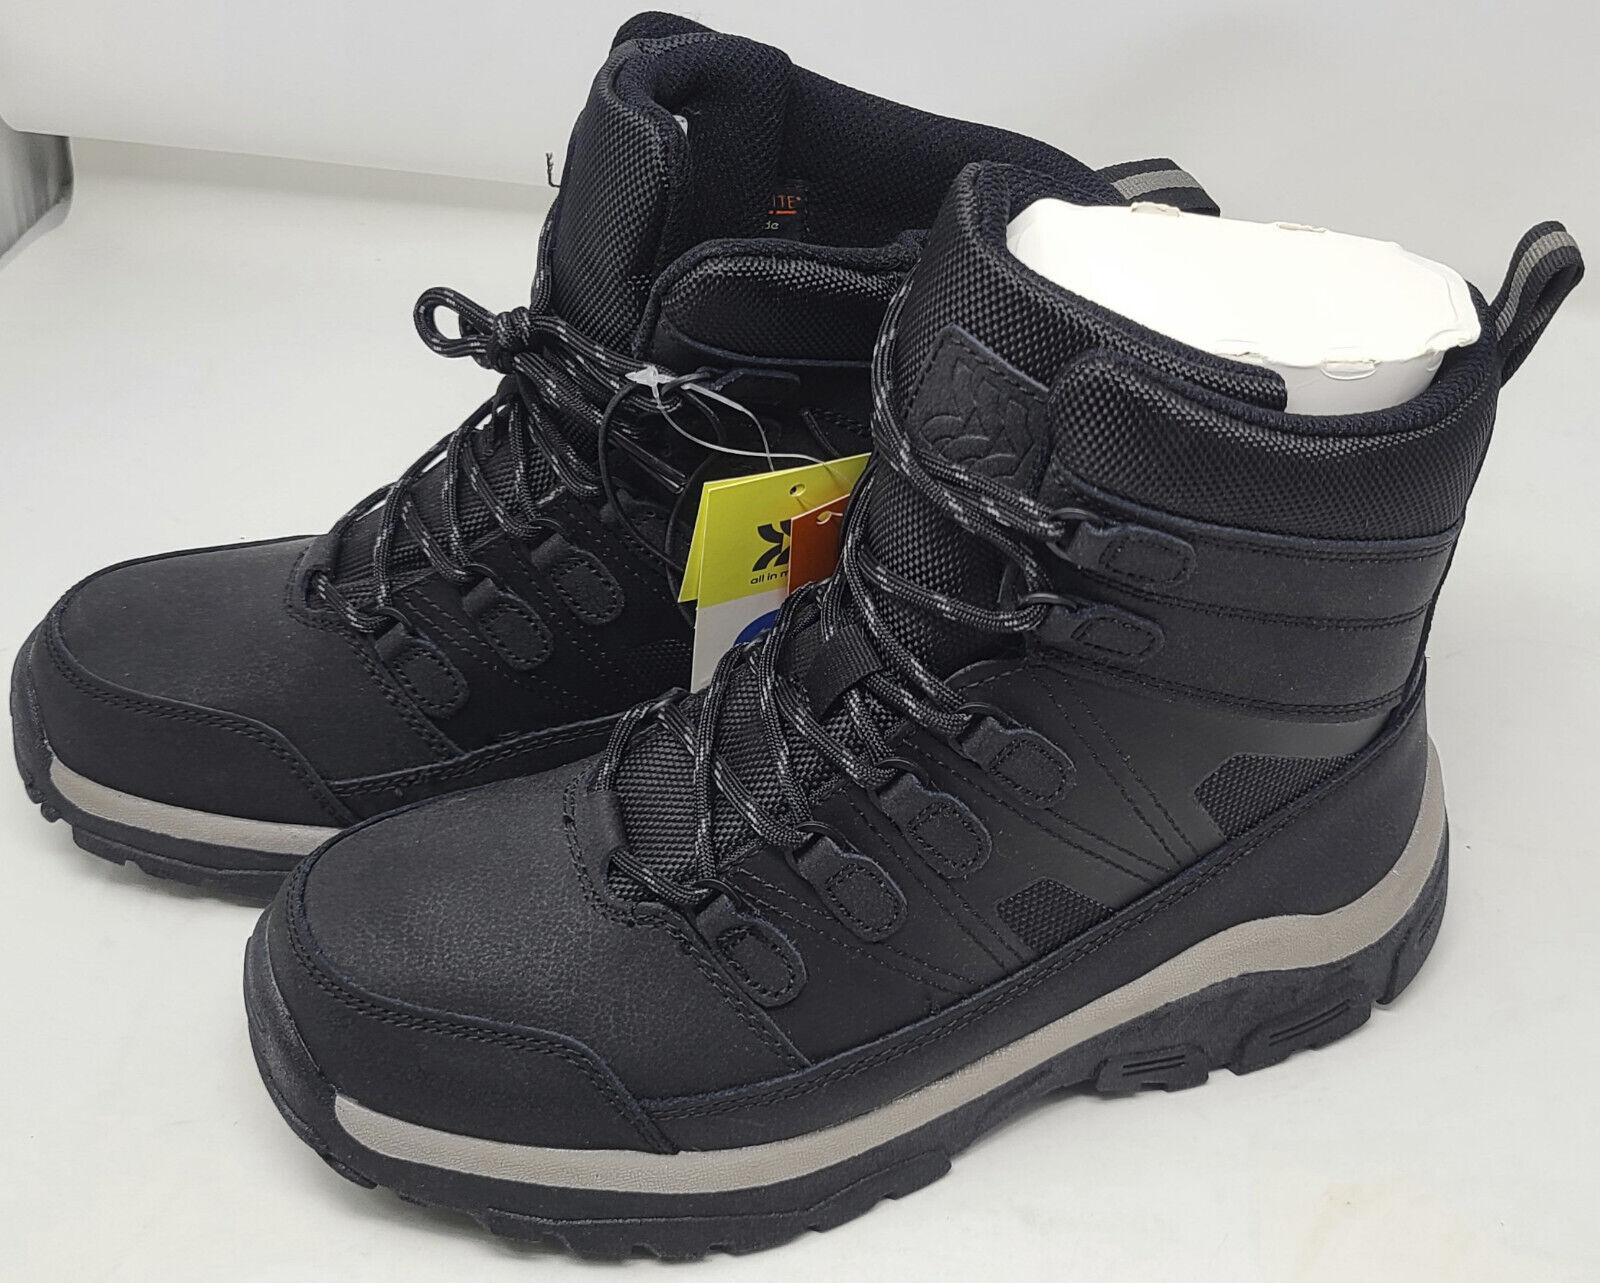 ALL IN MOTION Men's ASHTON Water Repellent Winter Boots BLACK Size 8 (605)